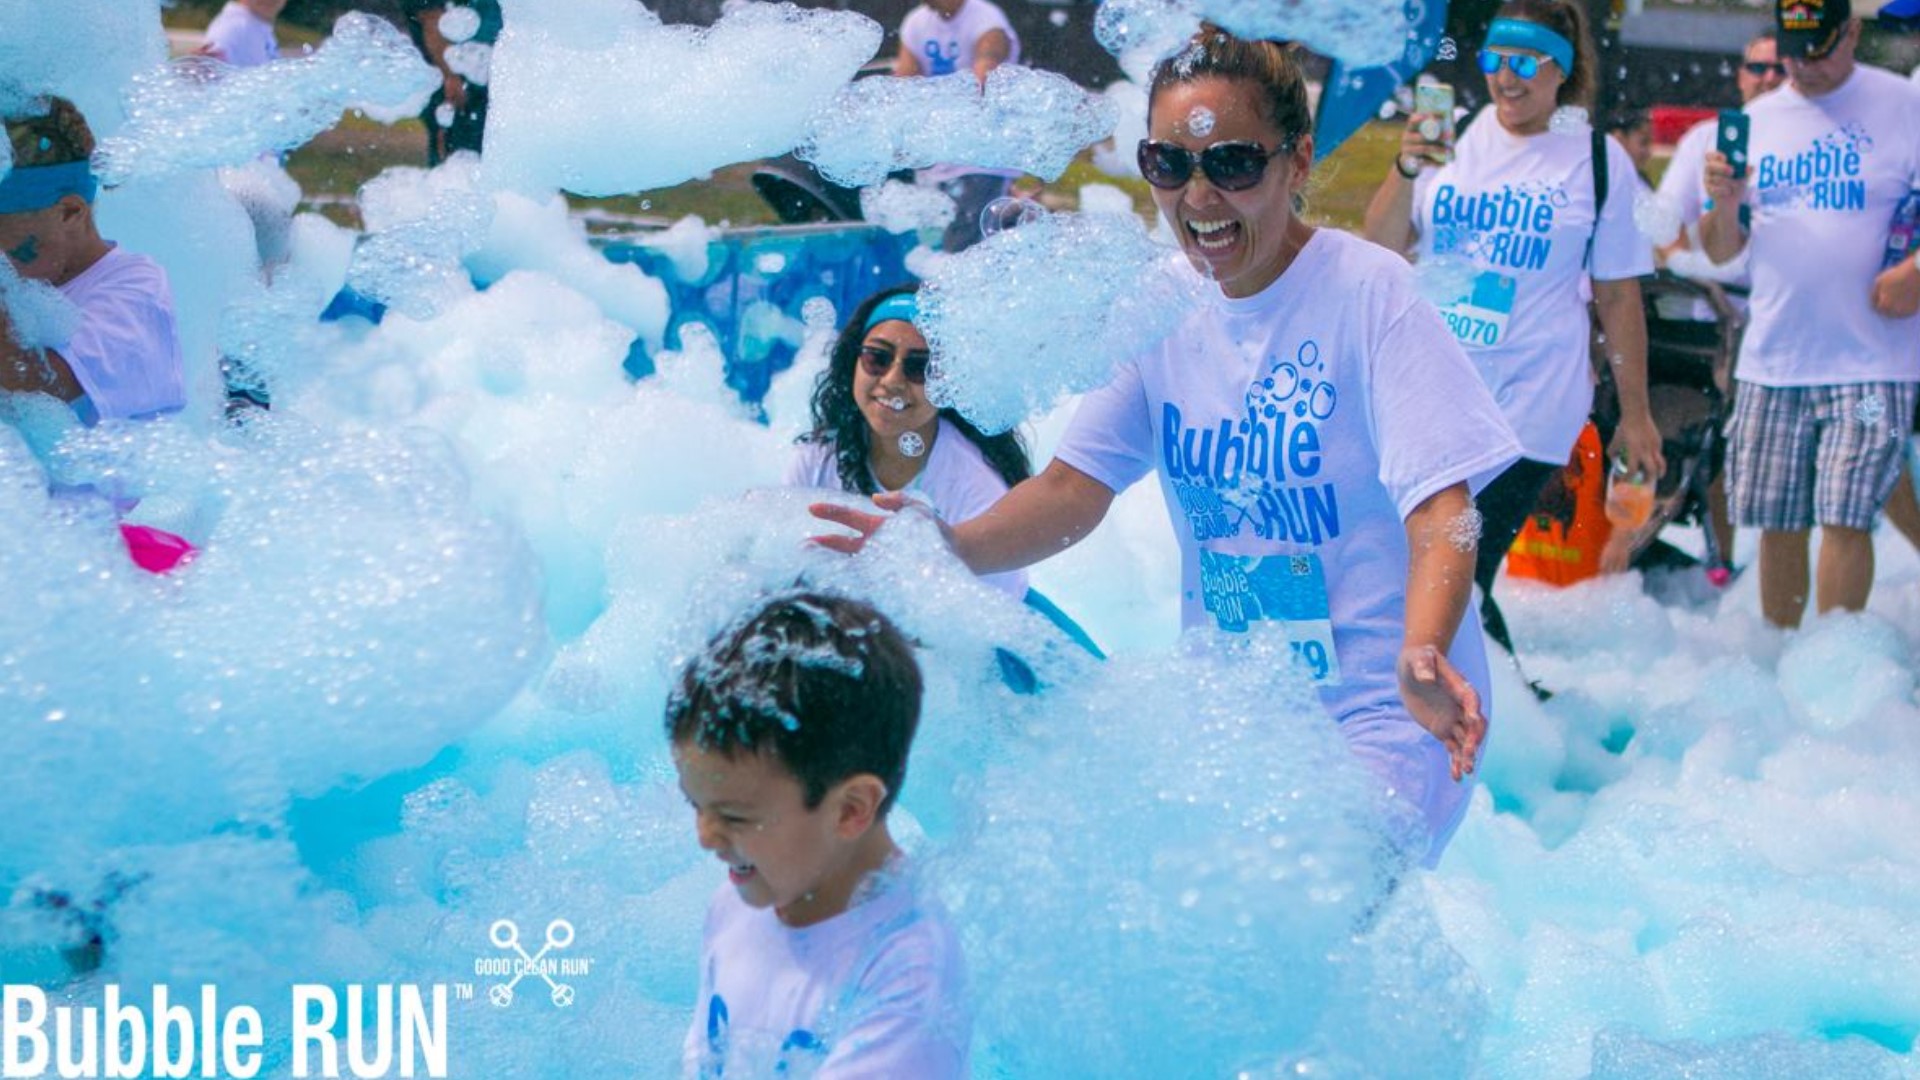 An official Bubble Run is coming to Cleveland in September